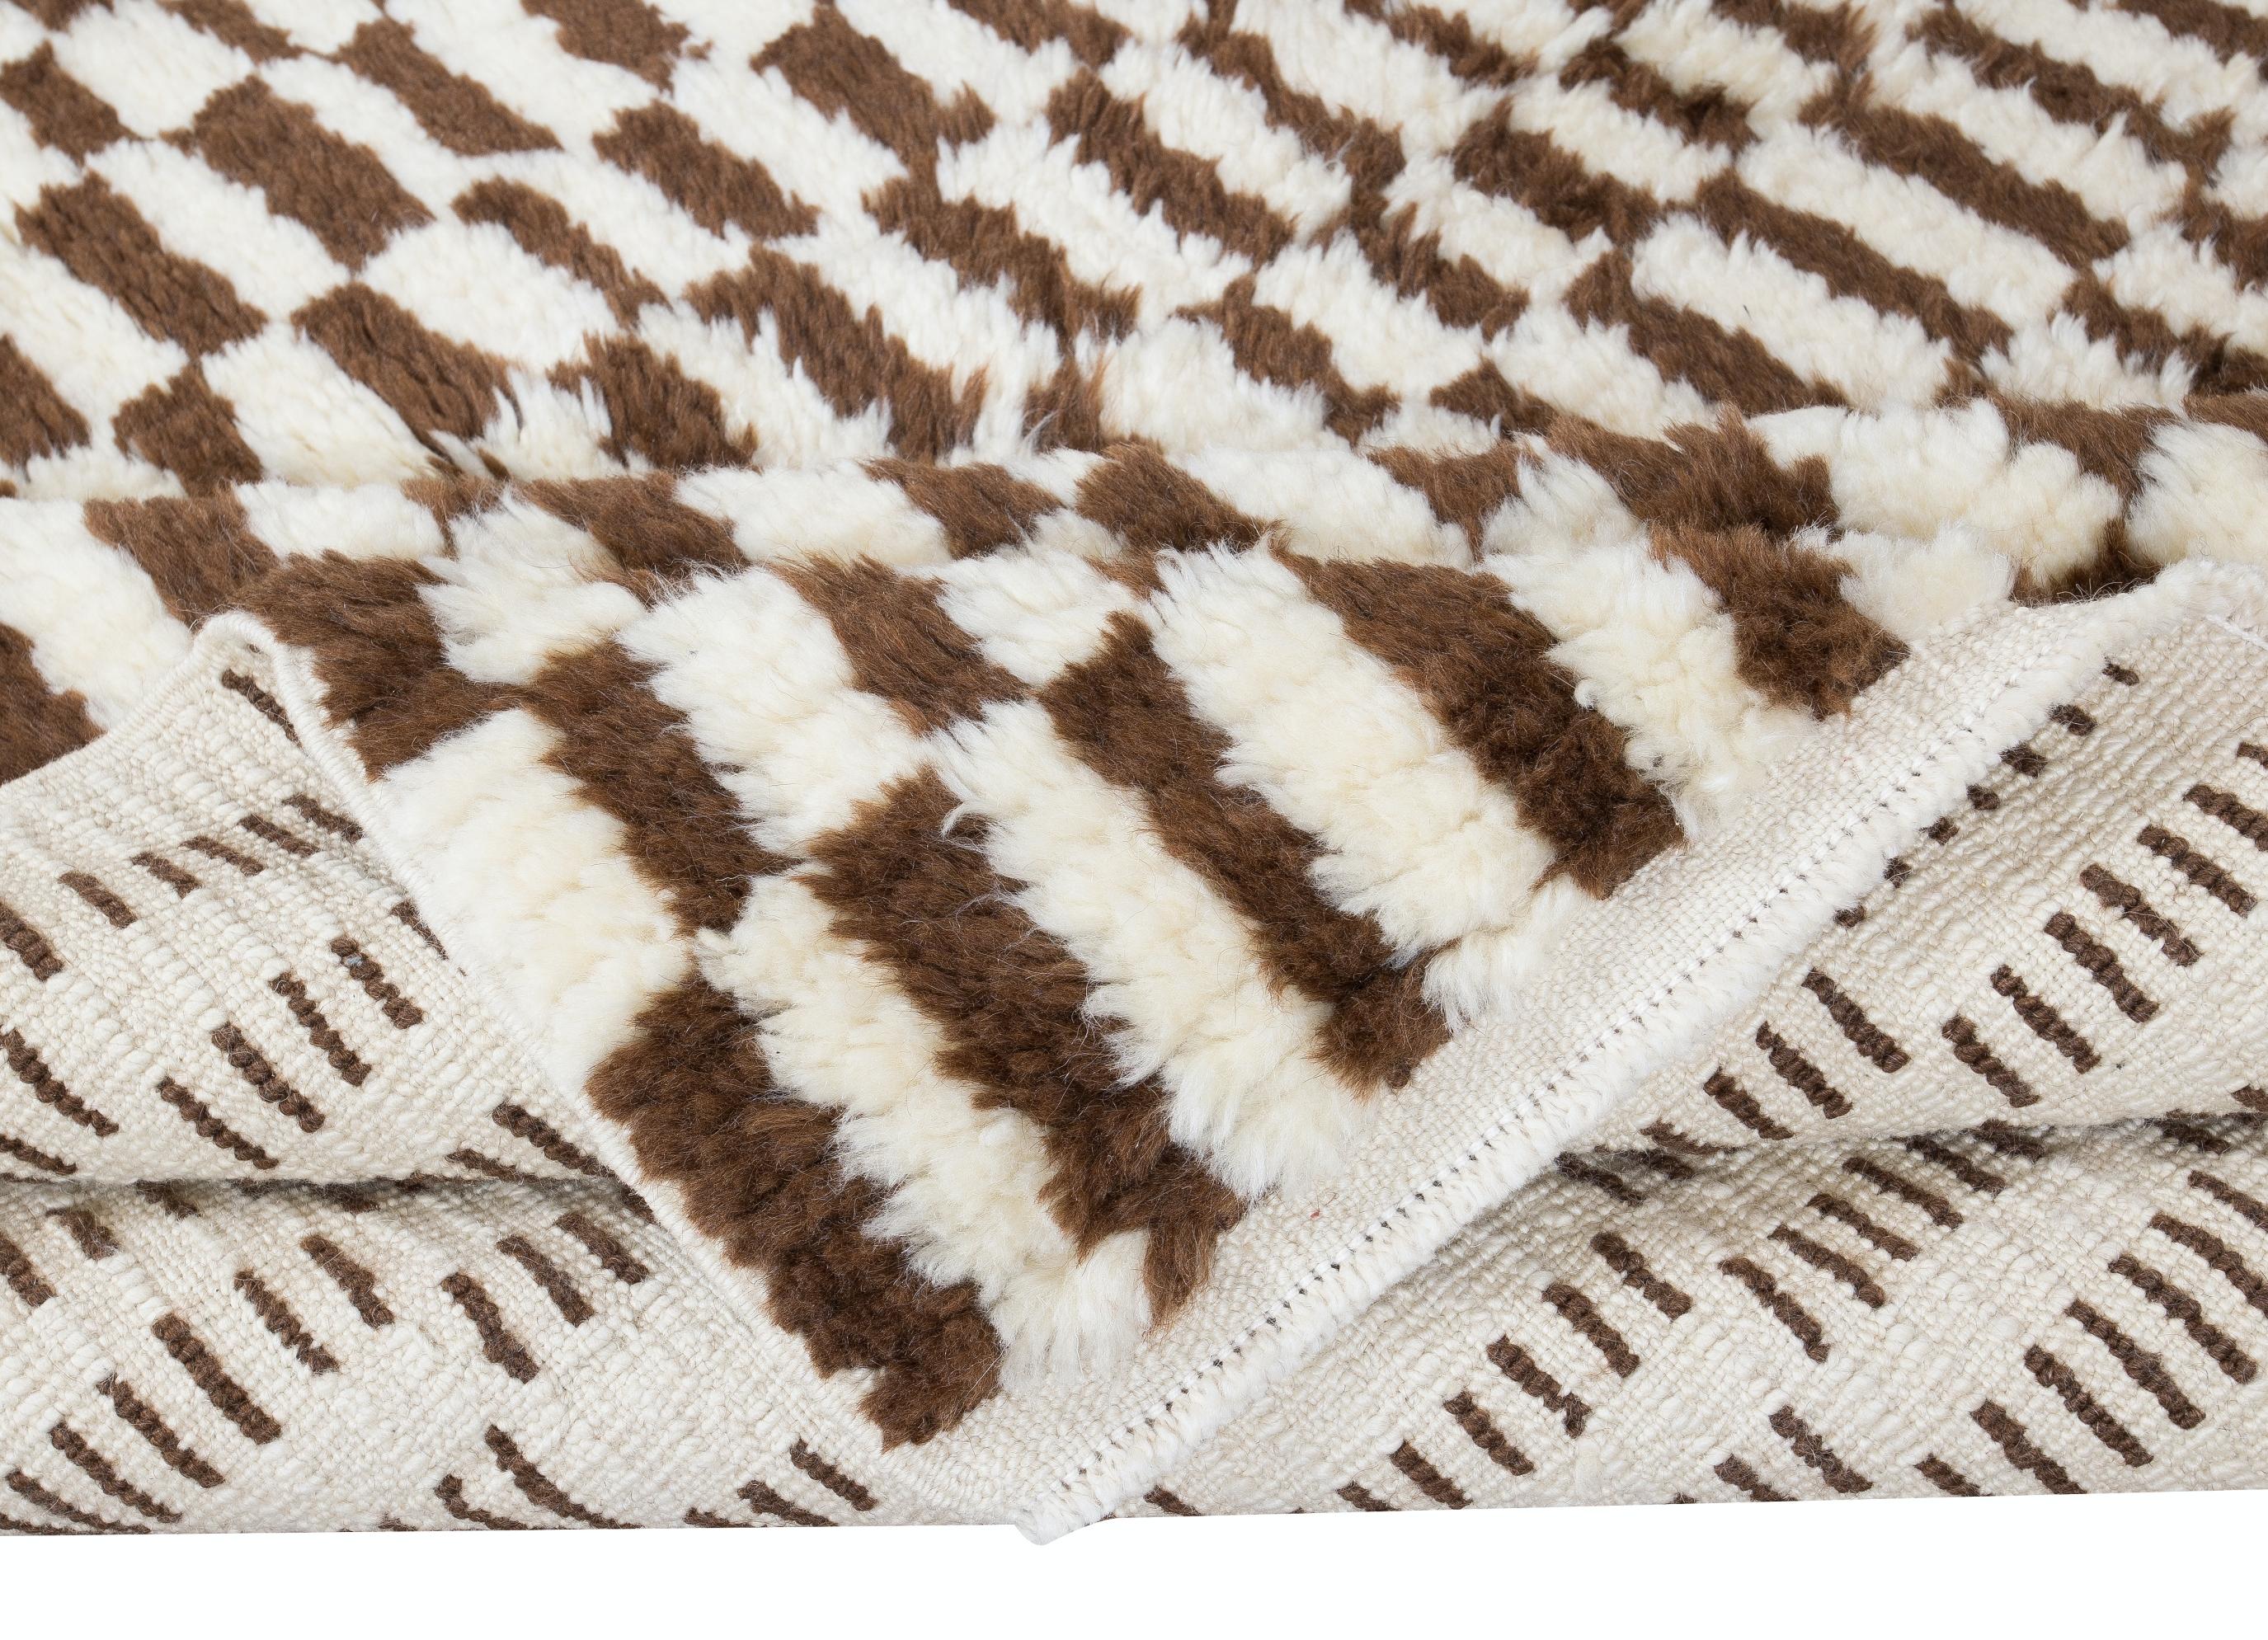 Elevate your living space with the exquisite charm of this new modern hand-knotted Moroccan berber beni ourain rug, crafted with precision and care from 100% wool. Combining the allure of Moroccan design with contemporary sensibilities, this rug is